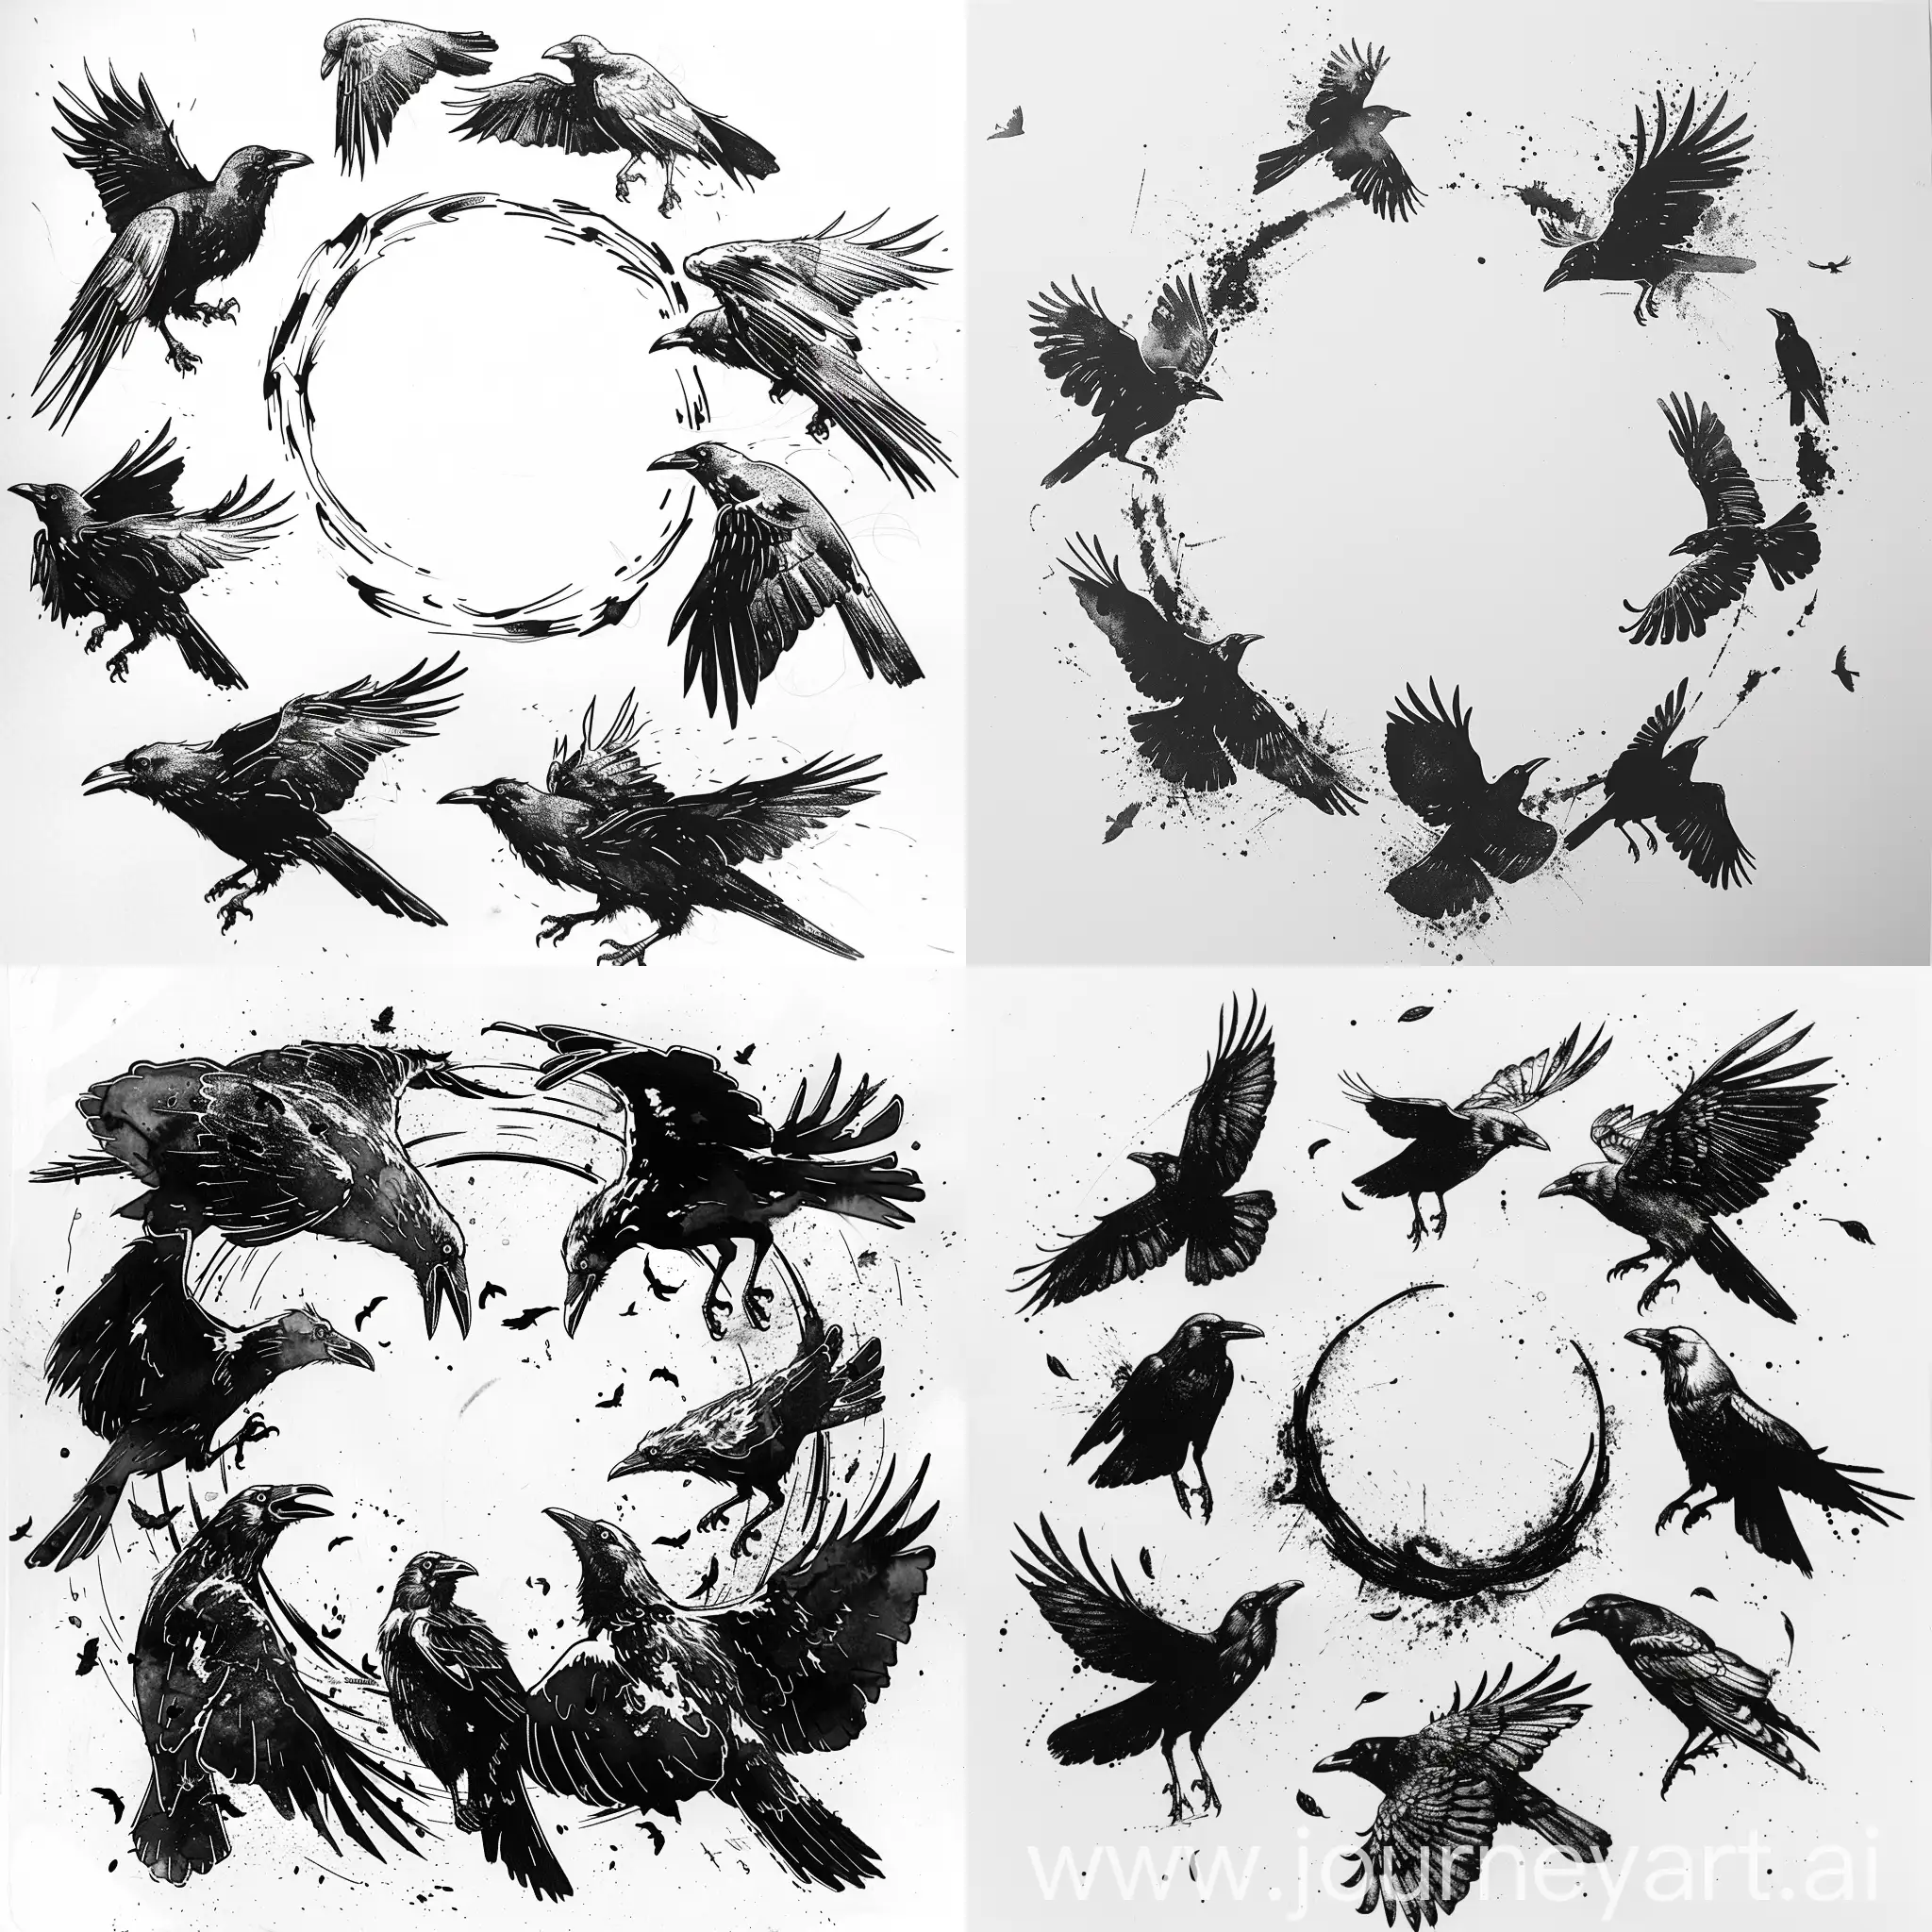 composition rhythm, ink!, monochrome, line art,crows circling in a ring,